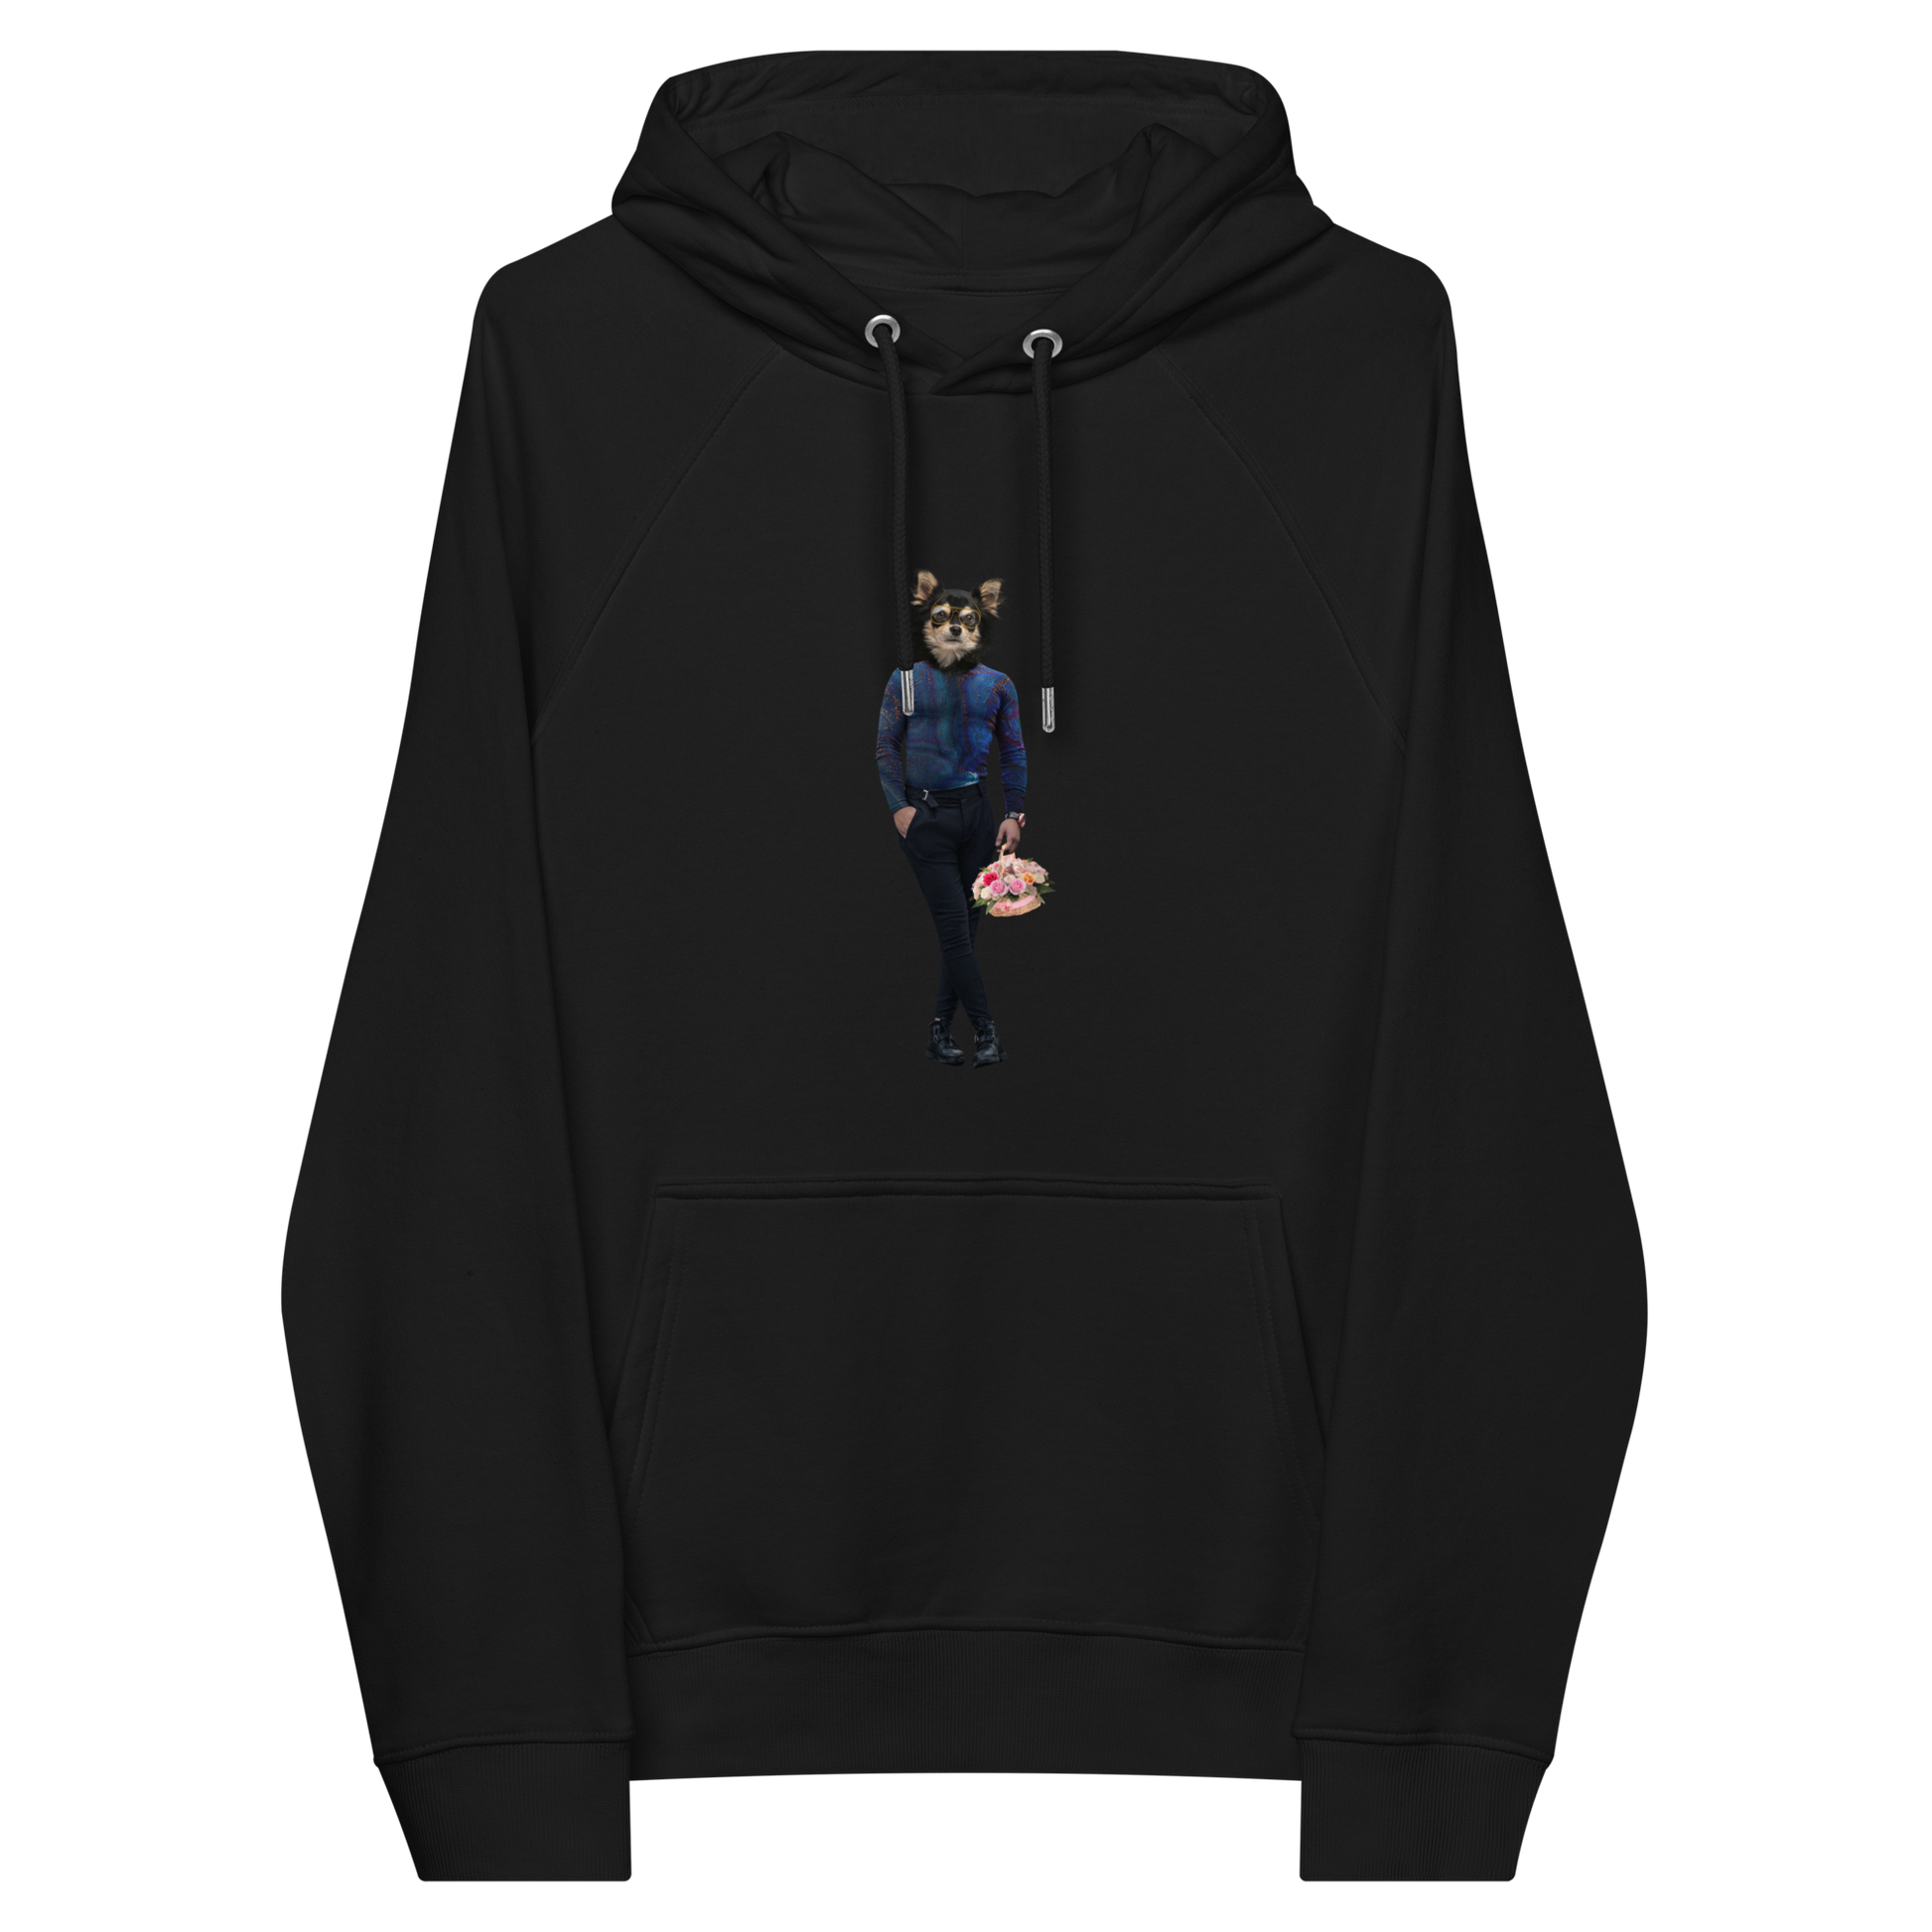 Black Anthropomorphic Dog Raglan Hoodie featuring an adorable Anthropomorphic Dog graphic on the chest - Funny Graphic Dog Hoodies - Boozy Fox